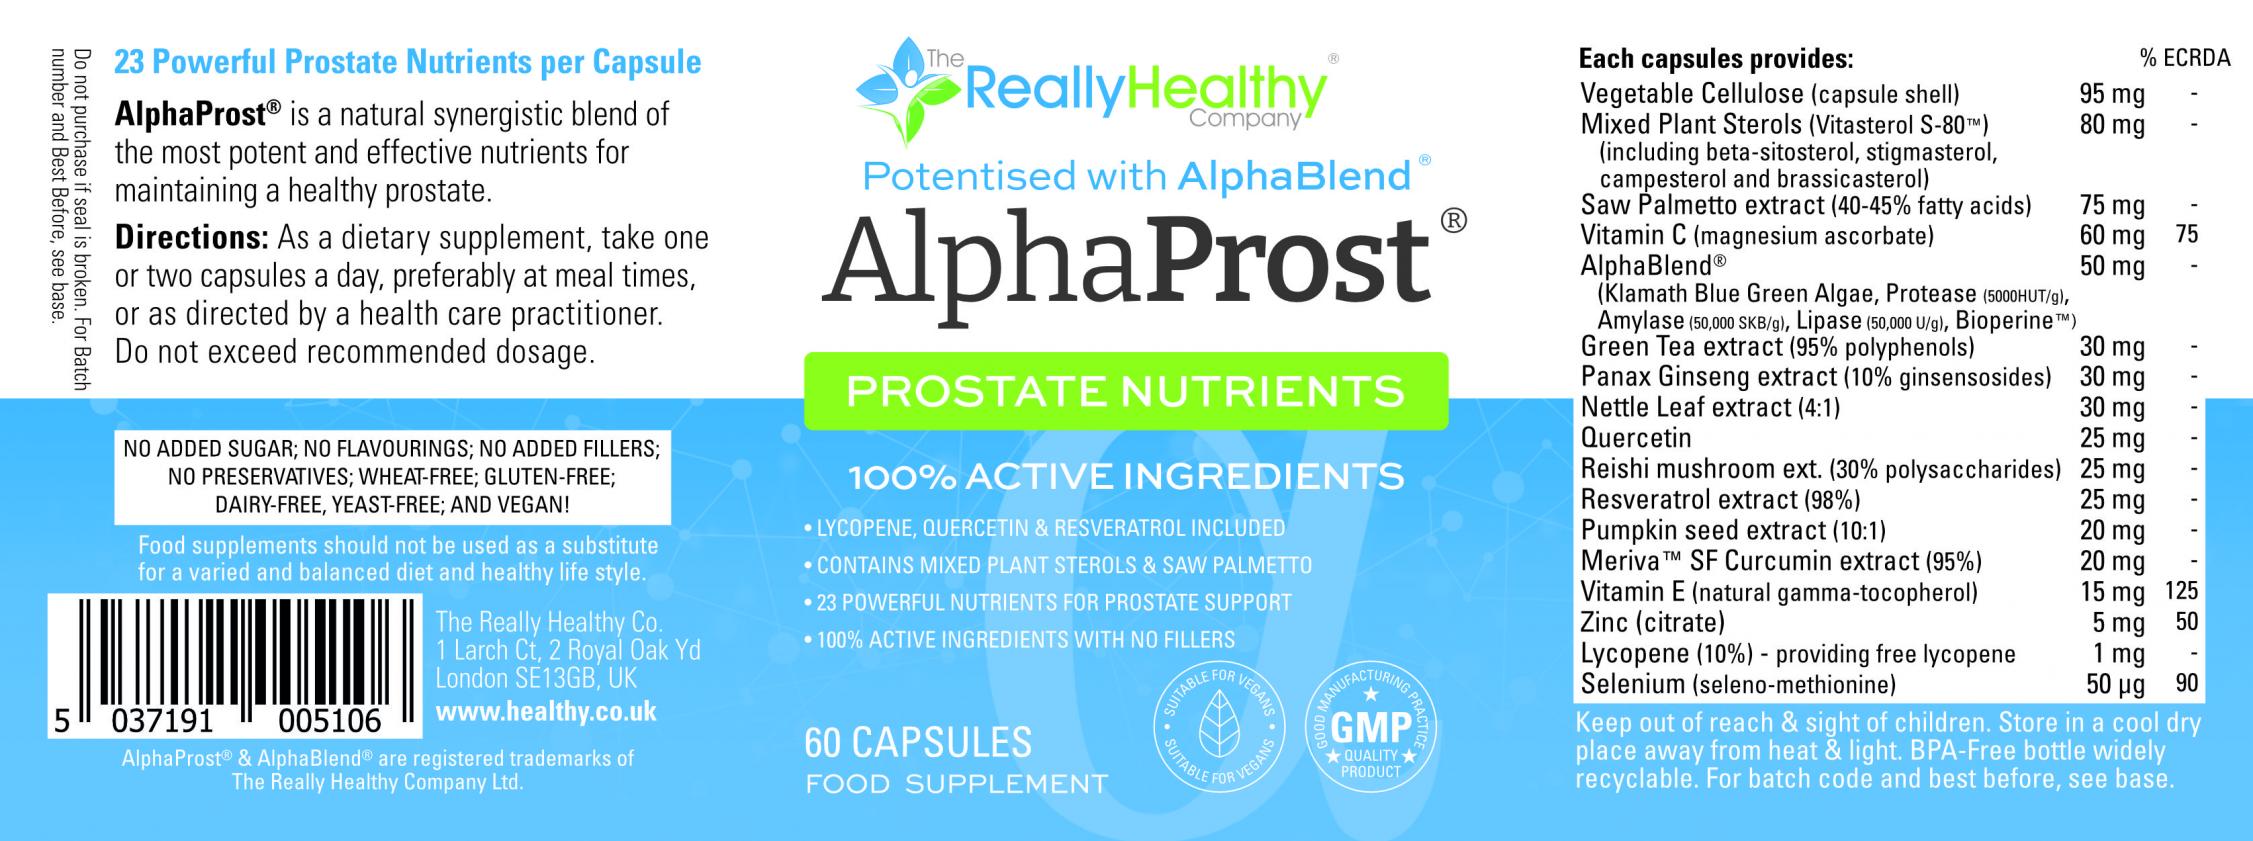 The Really Healthy Company AlphaProst Prostate Nutrients 60's